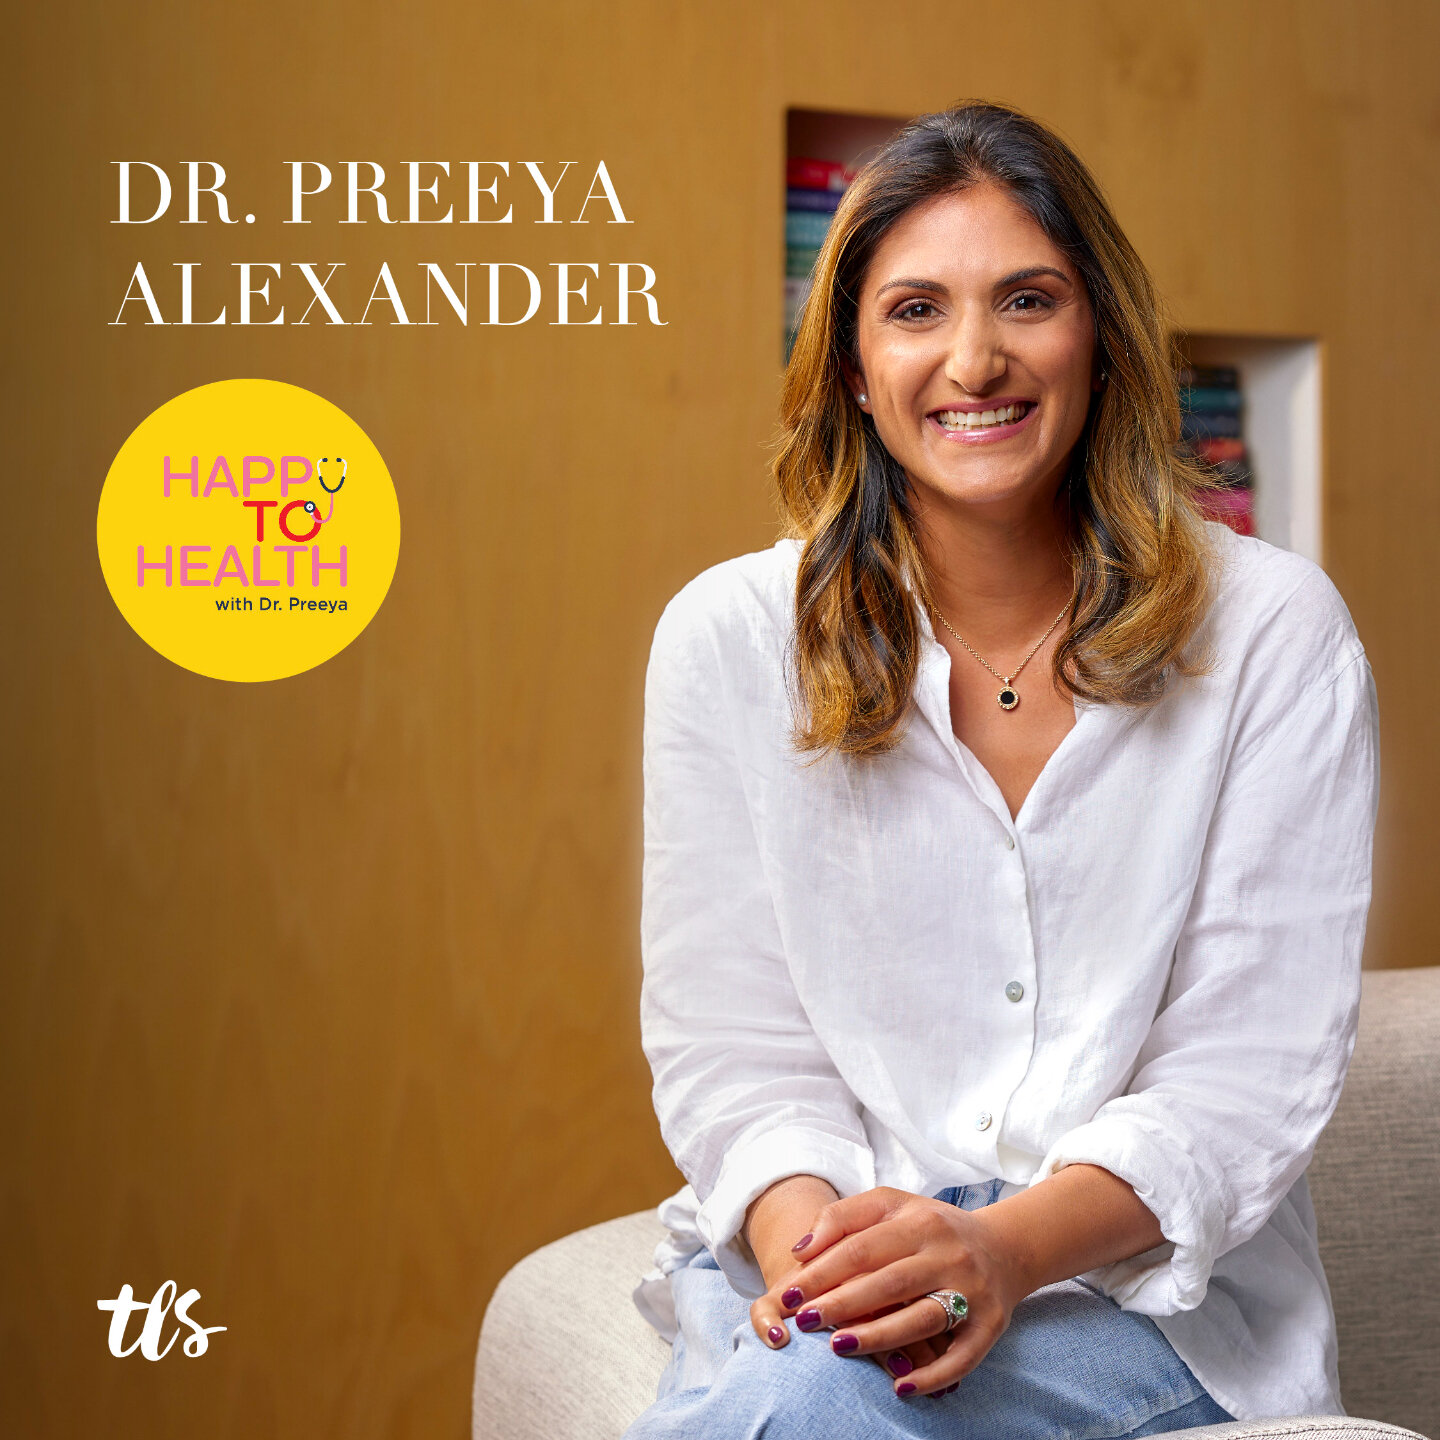 THE TALENT SUITE|| New podcast alert 🎧

Are you just as fed up with medical misinformation as we and our experts are here at TLS? Then @doctor.preeya.alexander has you covered with her new podcast 'Happy to Health' which launches today. Full of medi